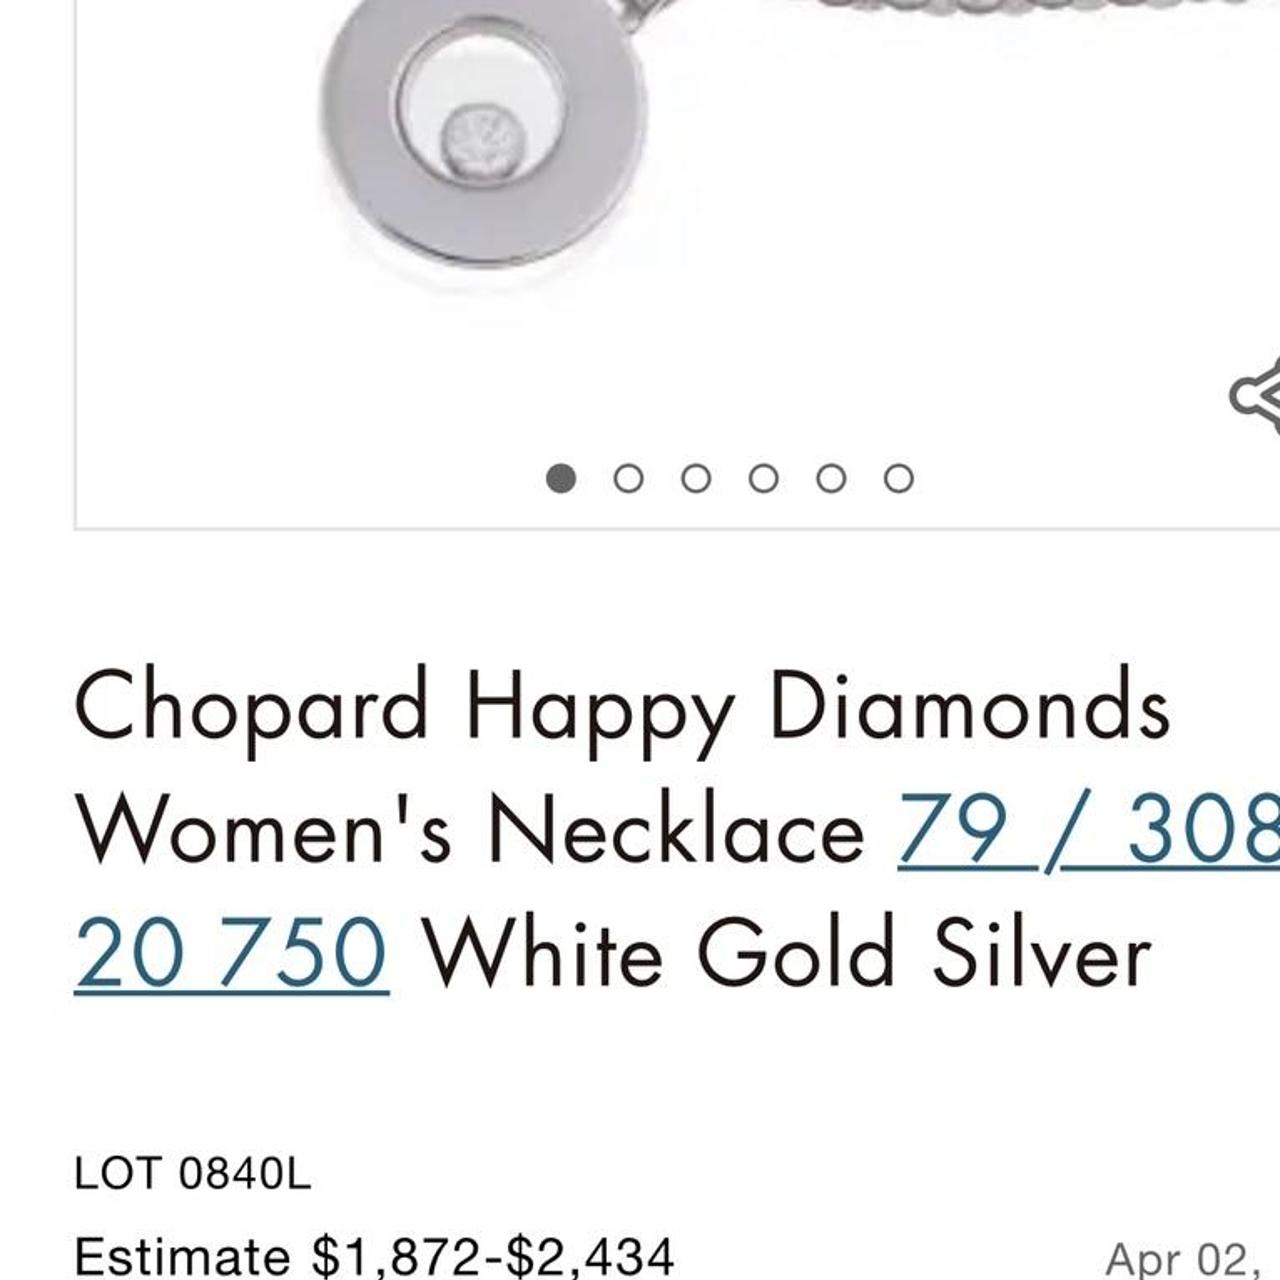 Product Image 4 - Chopard pendant code 79/3086-20. Happy